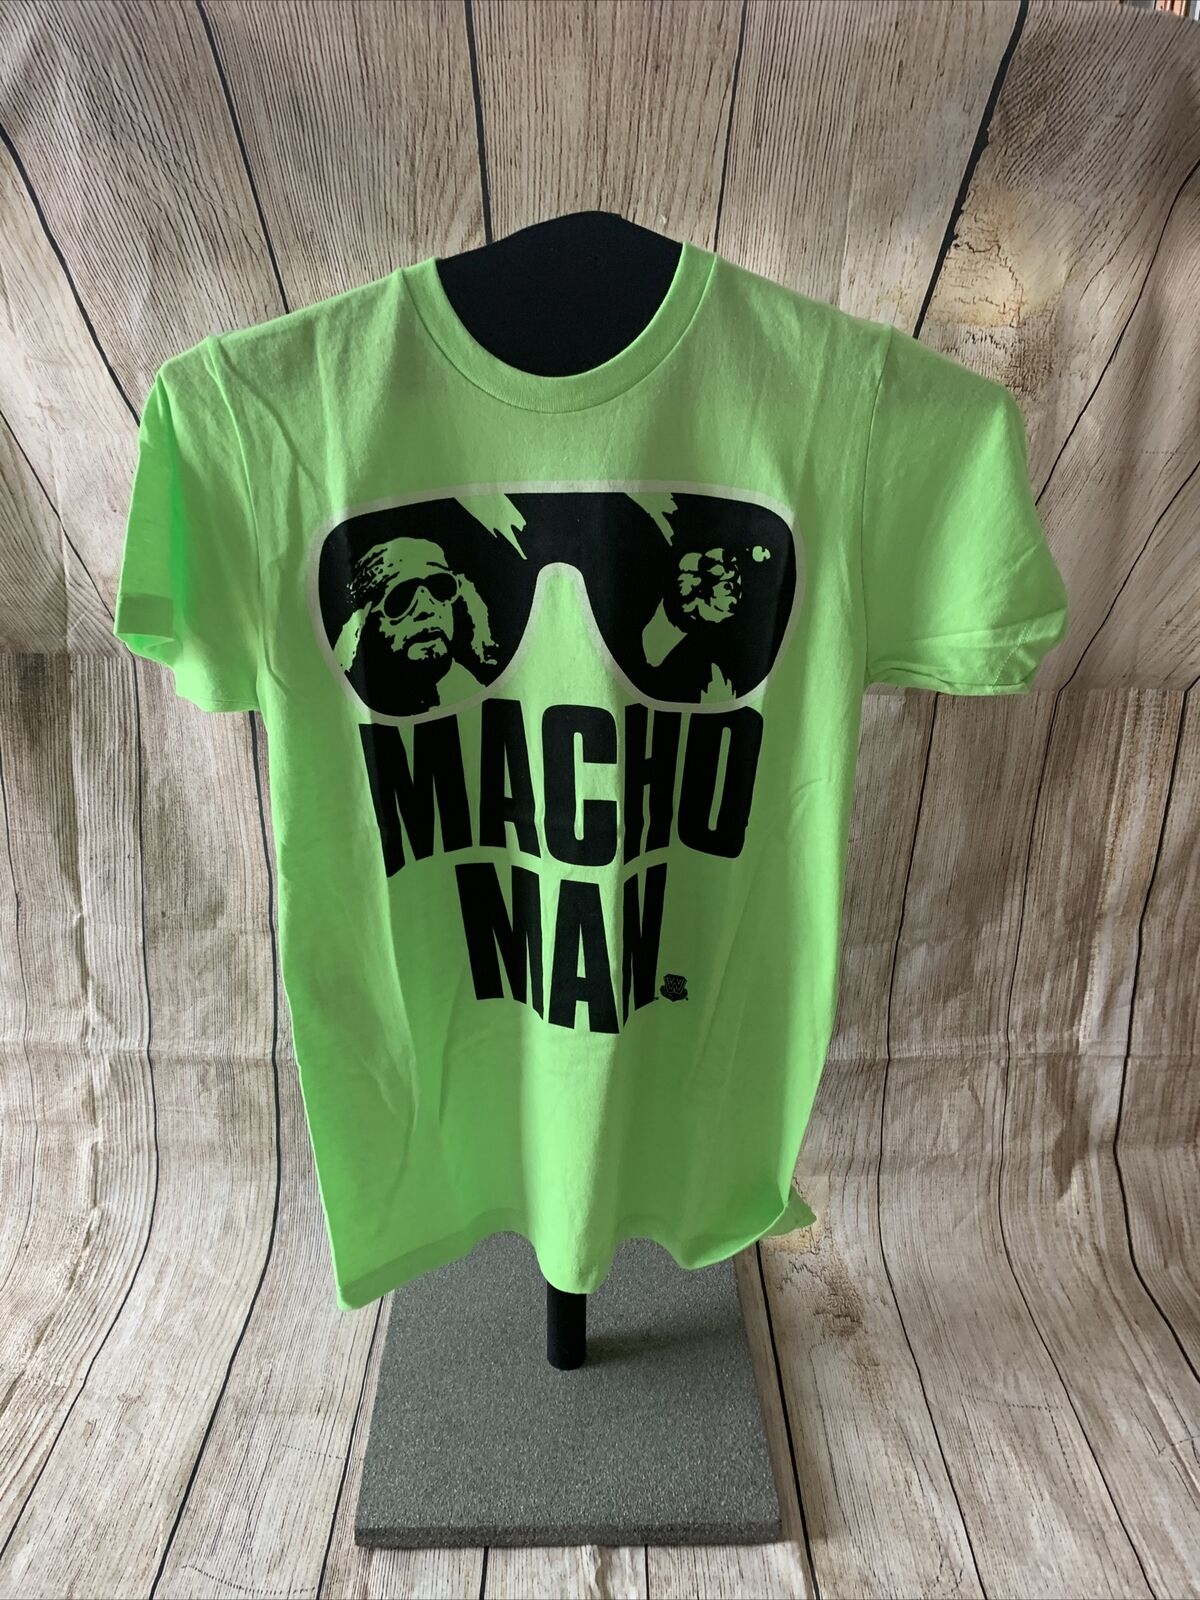 Wwe Macho Man Randy Savage Authentic Safety Green T-shirt Men's Small New